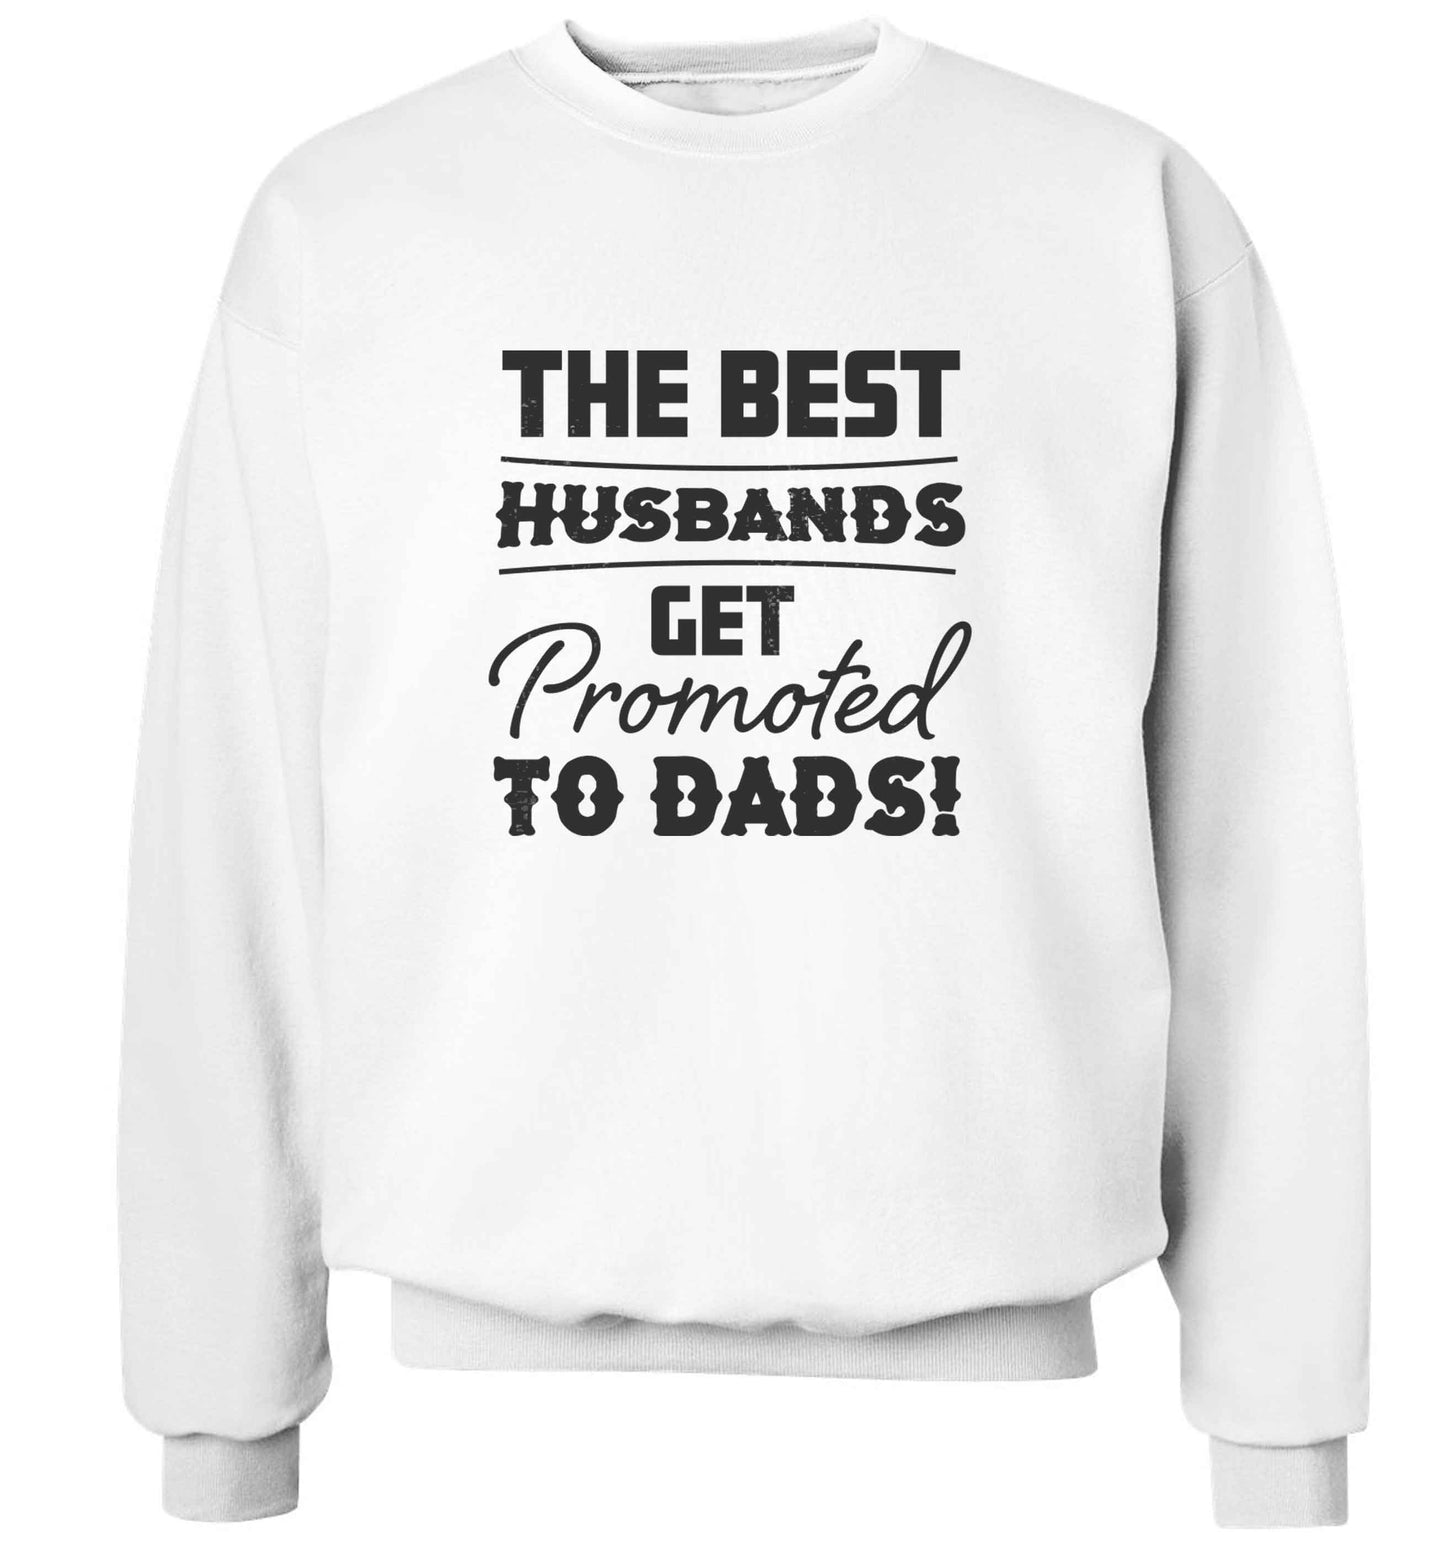 The best husbands get promoted to Dads adult's unisex white sweater 2XL